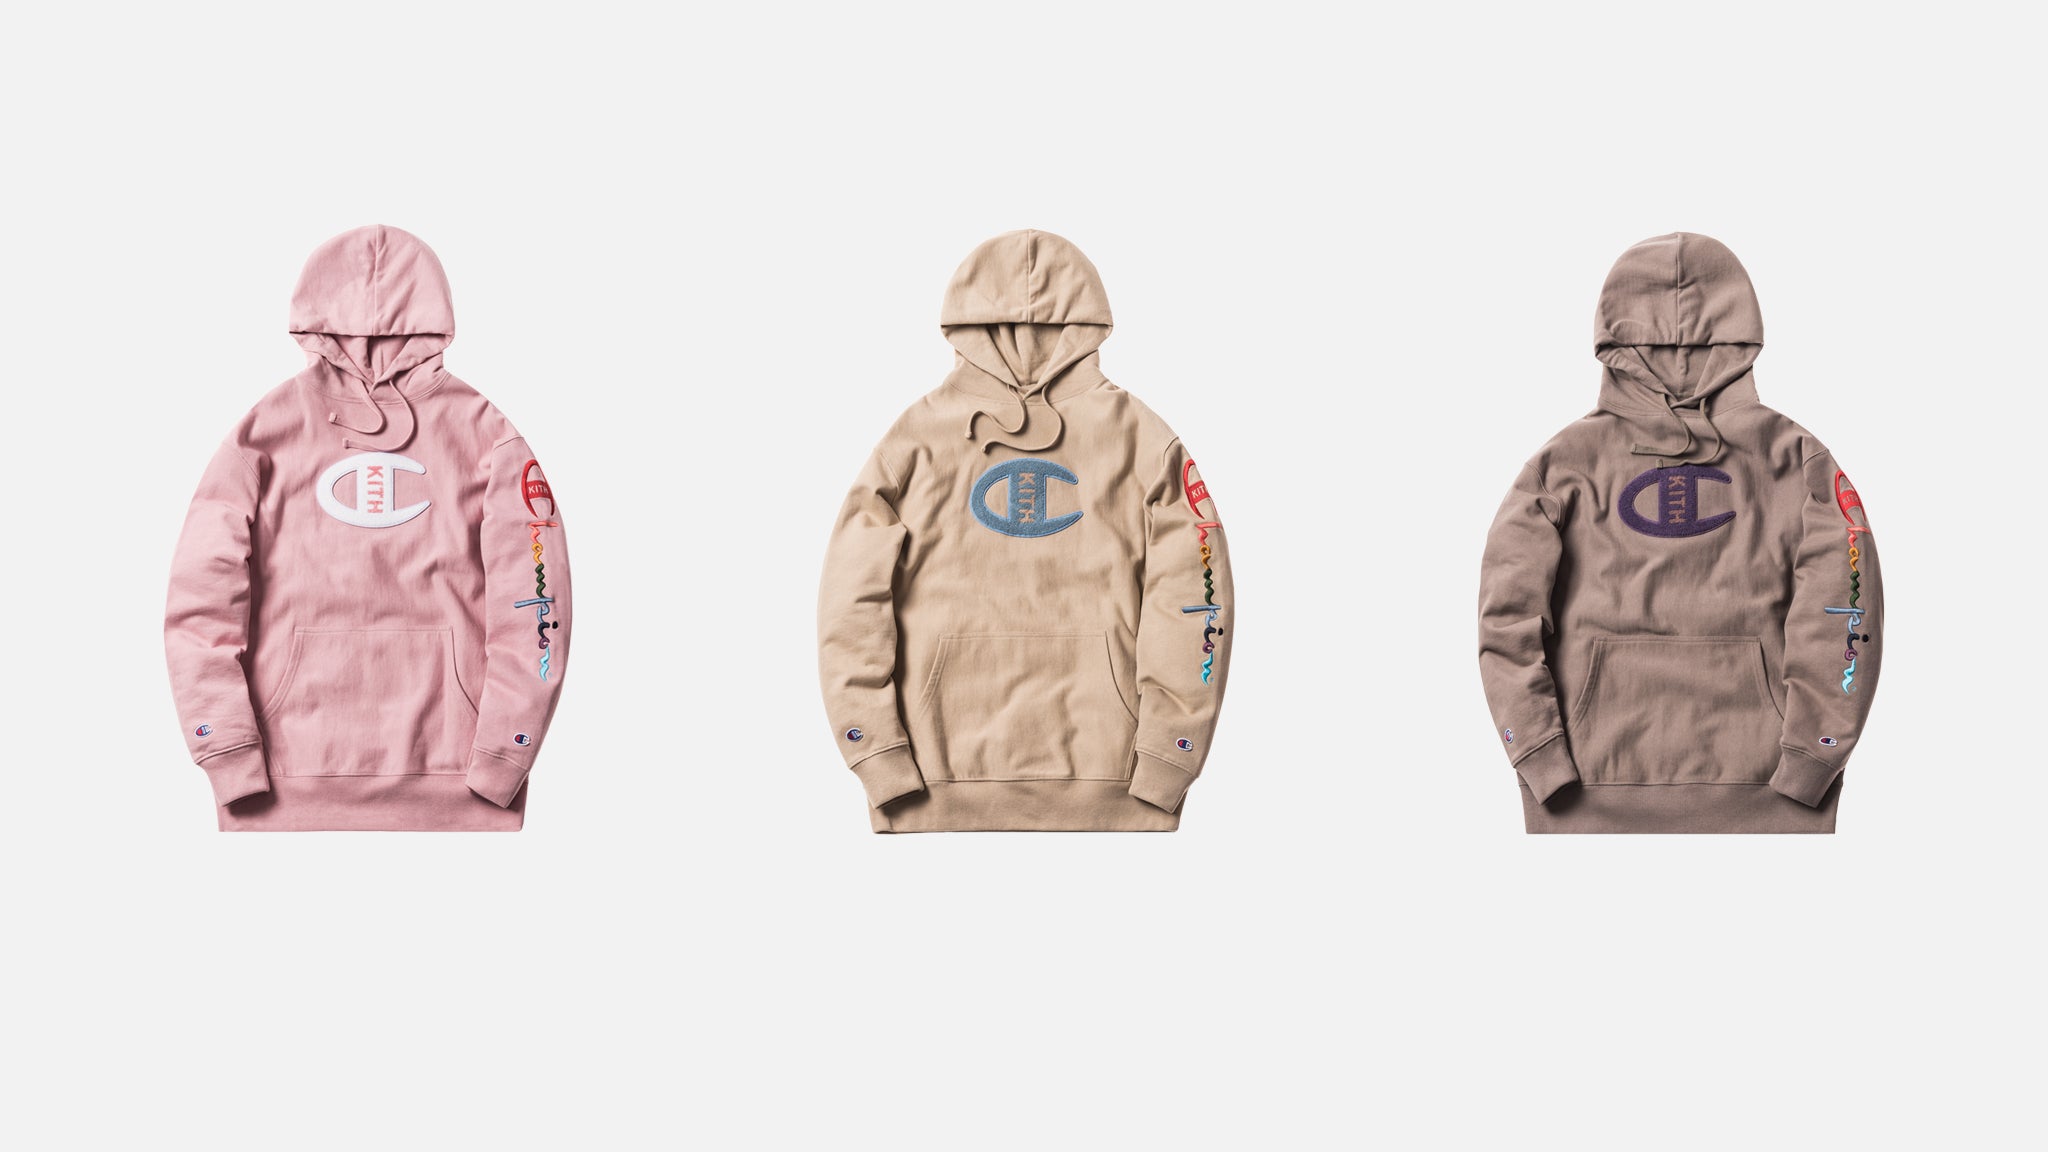 A Closer Look at Kith x Champion Collection